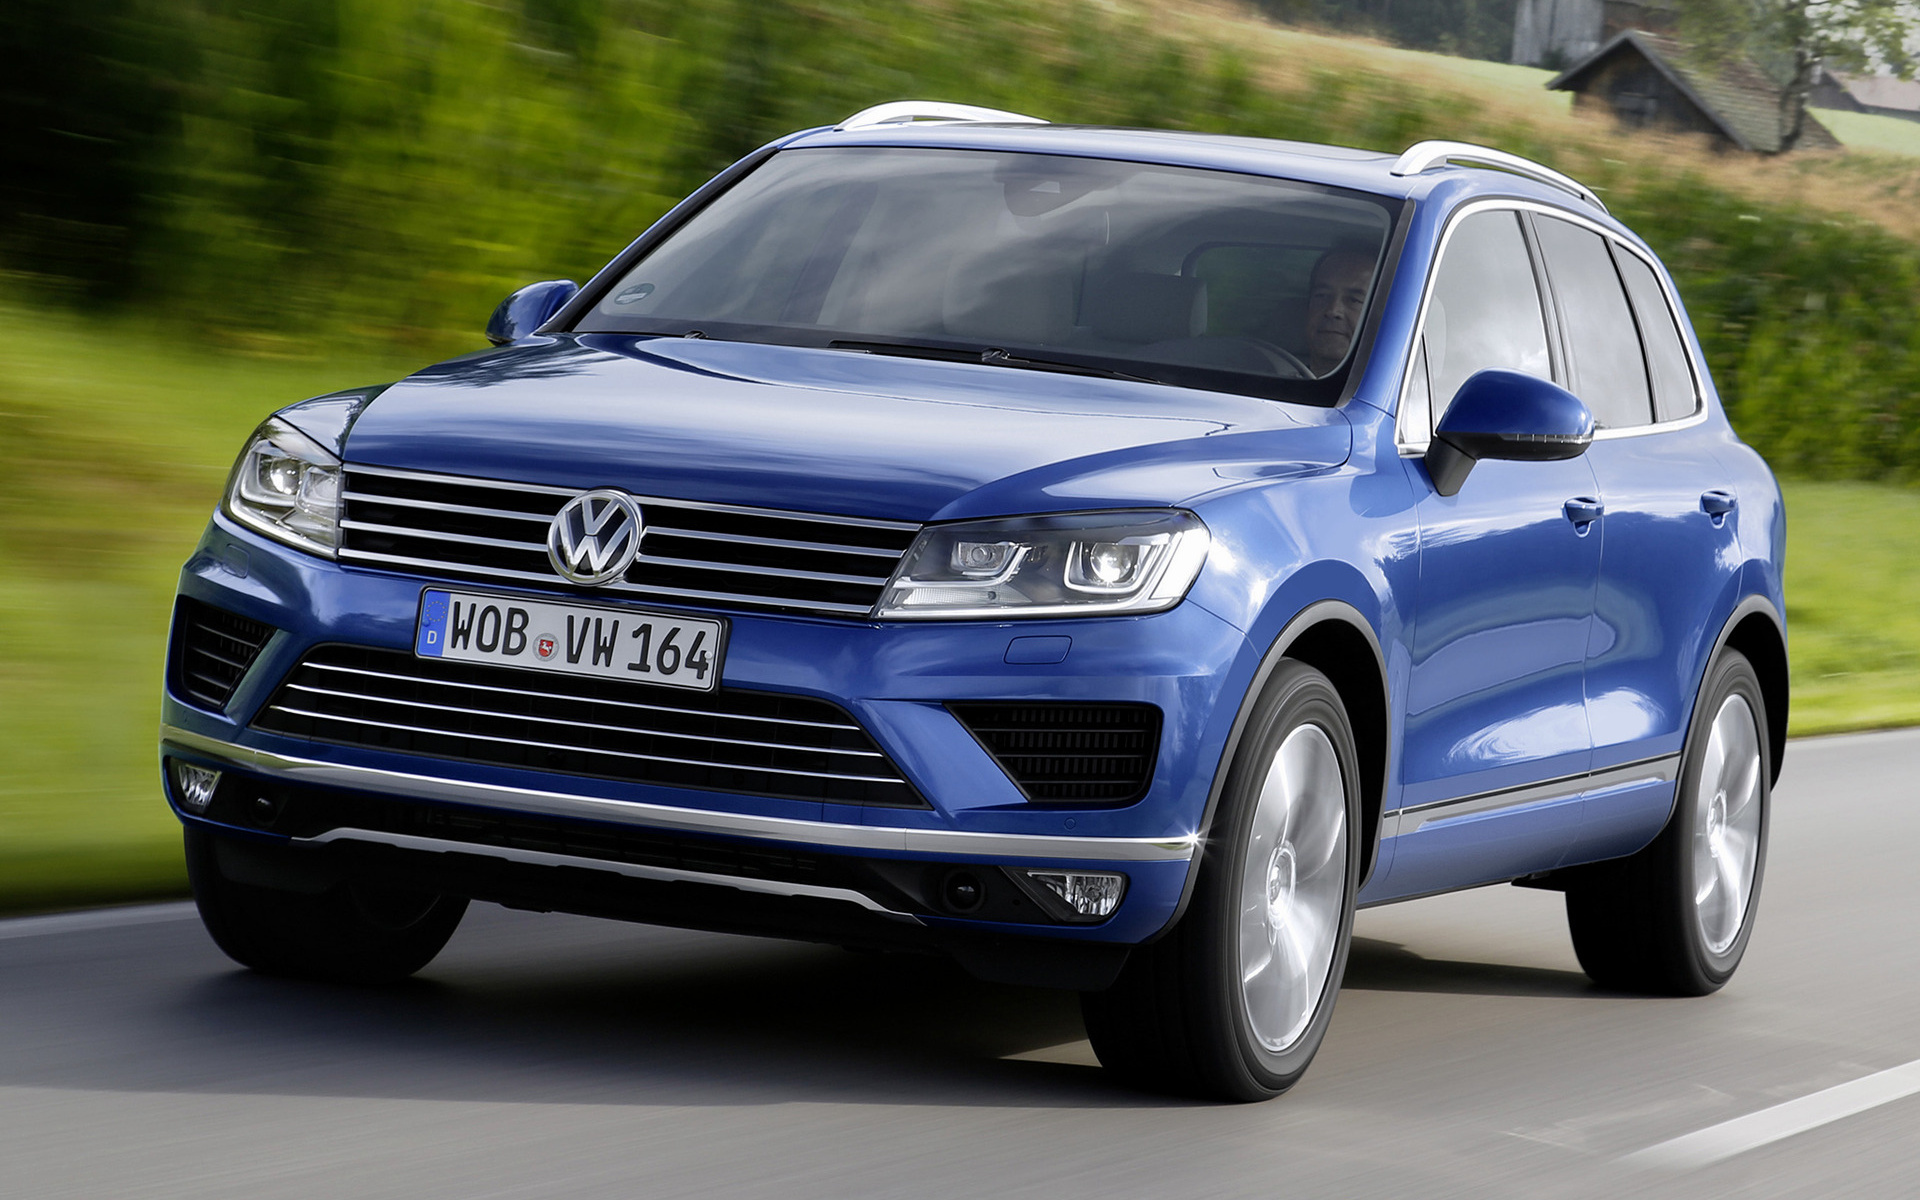 2014 Volkswagen Touareg - Wallpapers and HD Images | Car Pixel